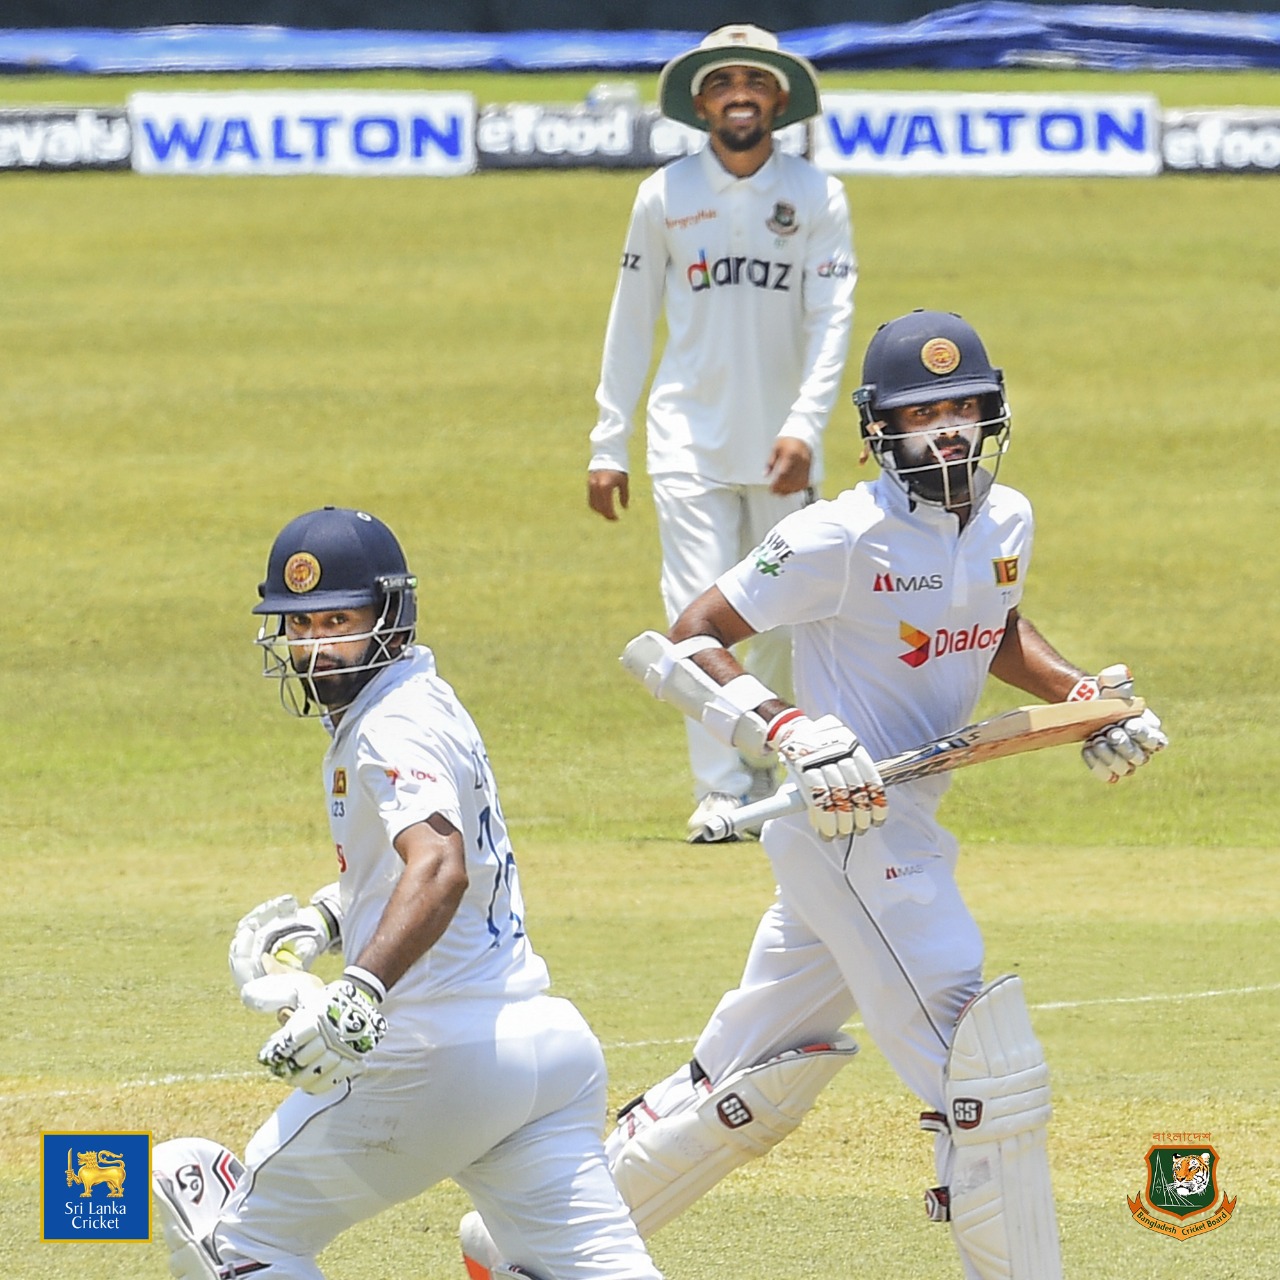 Sri Lanka 229/3 in reply to Bangladesh’s 541/7 decl. – Karunaratne a captain’s knock of 85 n.o., Thirimanne 58